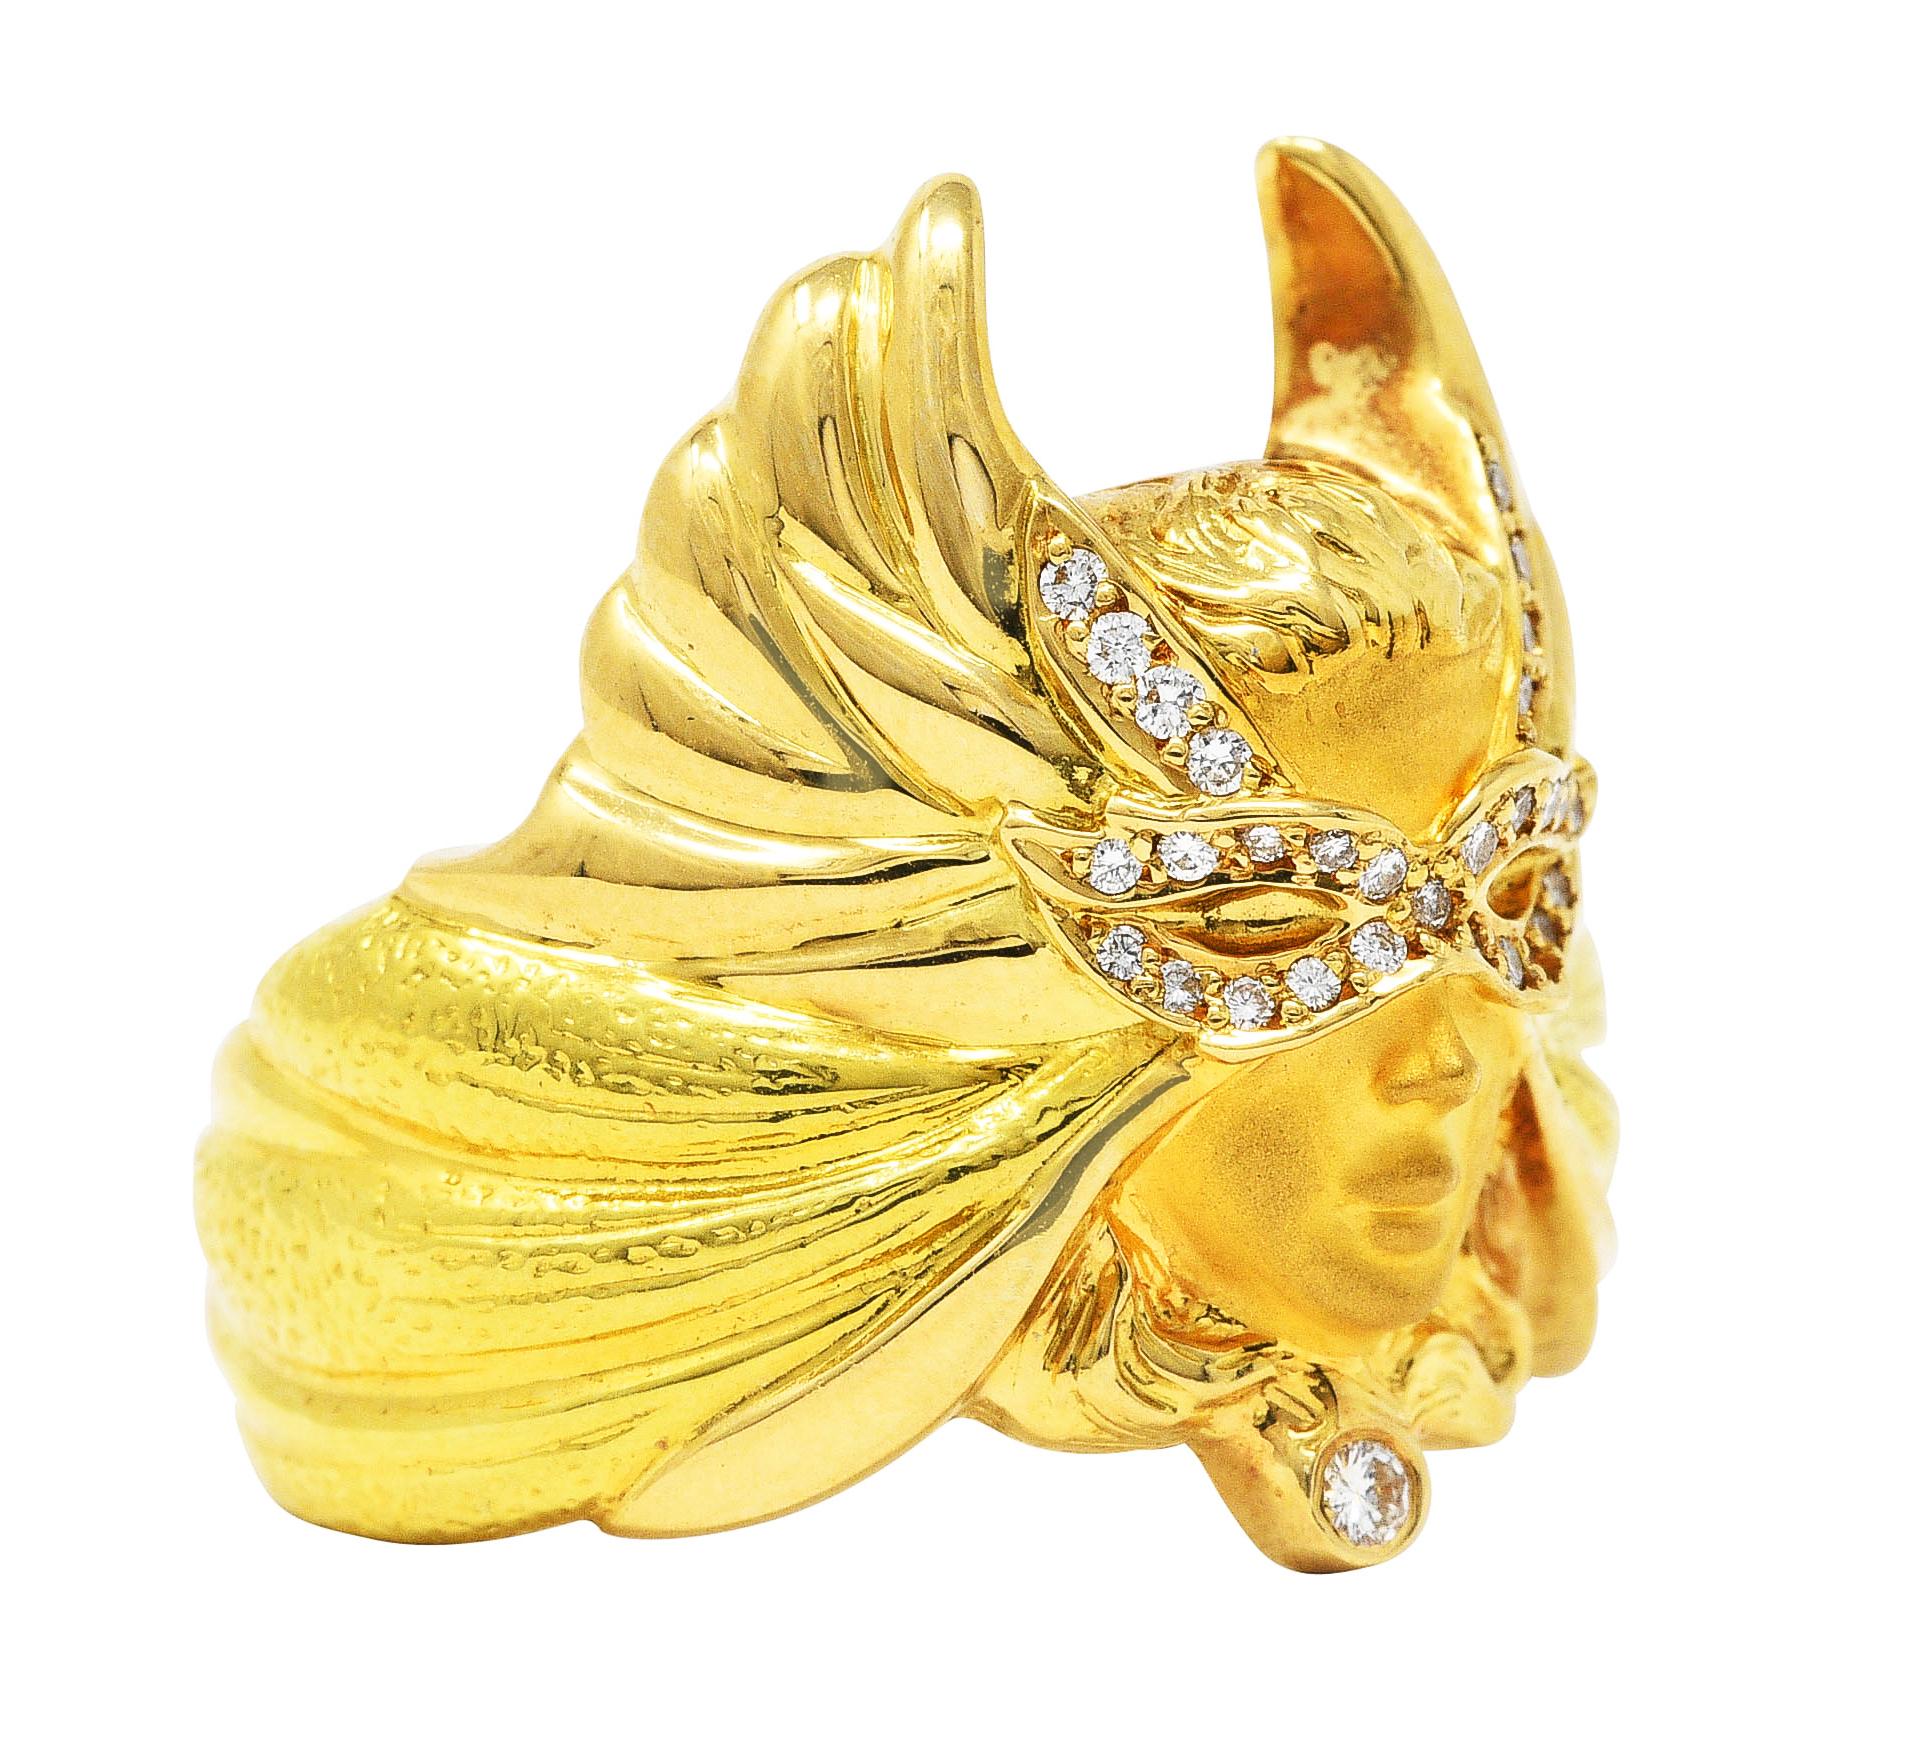 Ring designed as head of a woman wearing masquerade style mask with sweeping wings

Wings are grooved highly polished yellow gold with stippled green gold segments

Mask and collar are accented by round brilliant cut diamonds

Weighing approximately